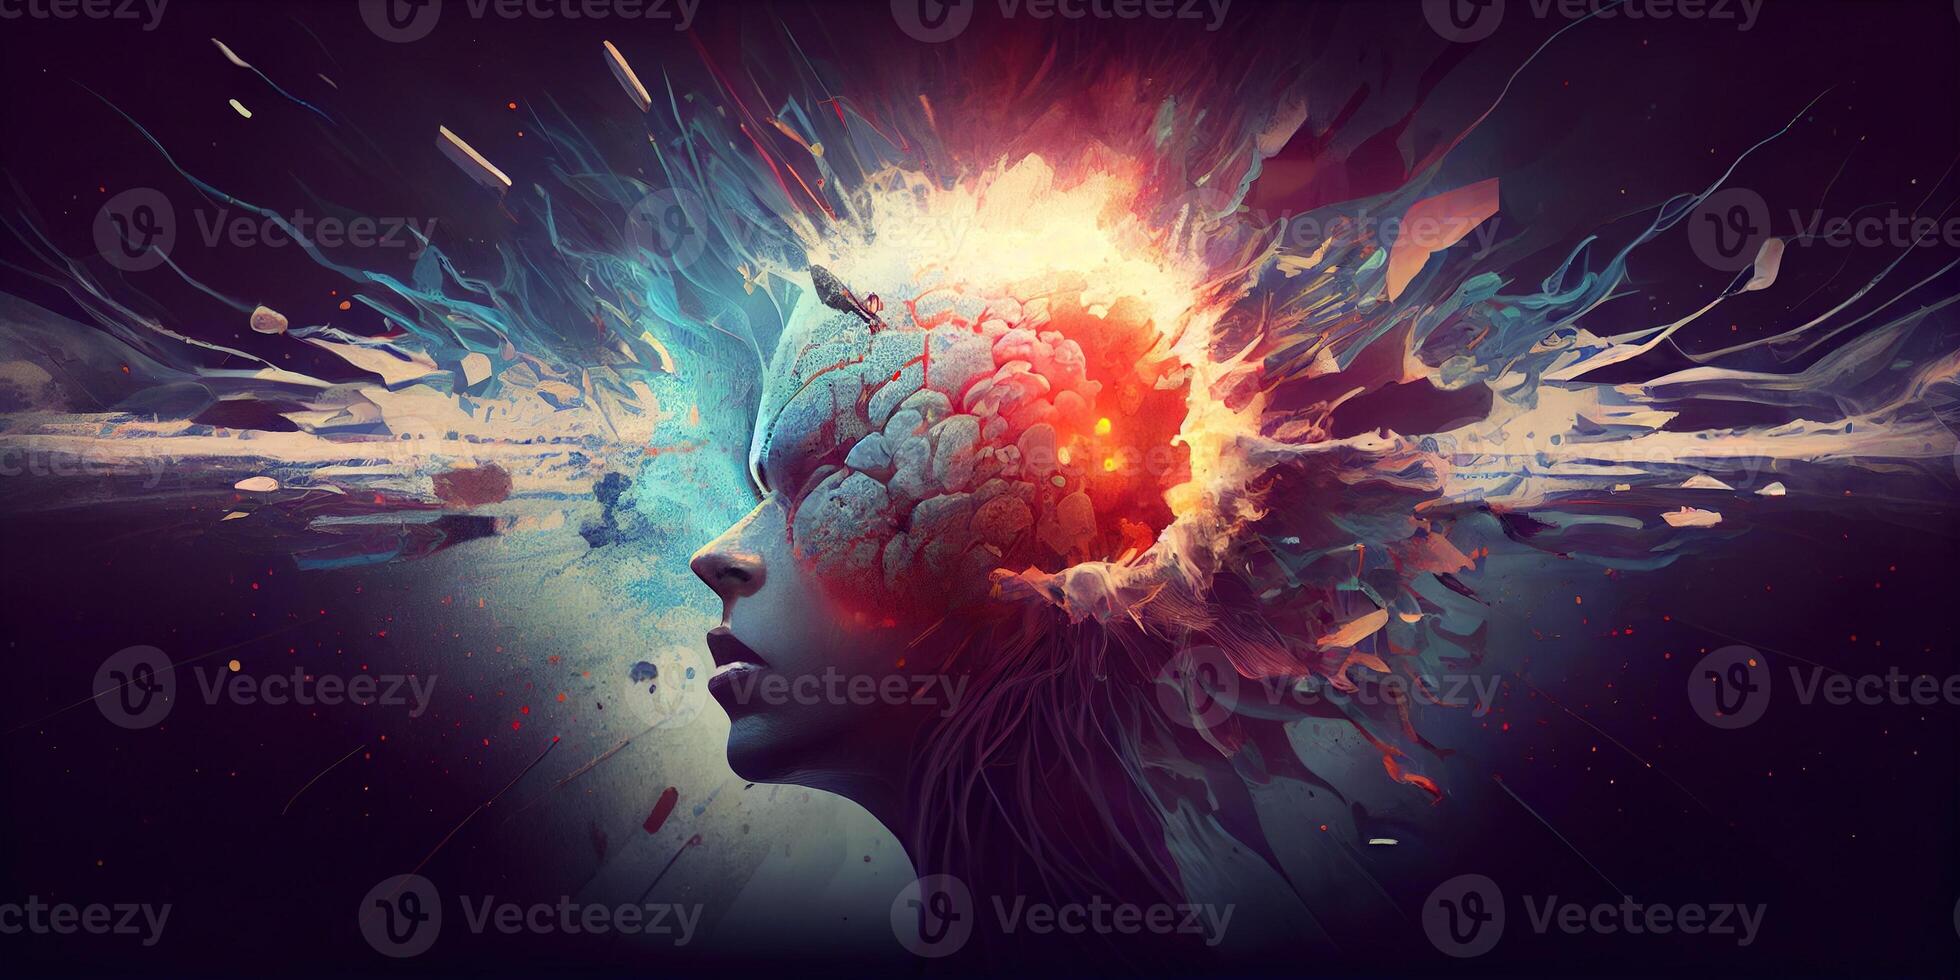 illustration of annual collective mind concept art, exploding mind, inner world, dreams, emotions, imagination and creative mind concept photo